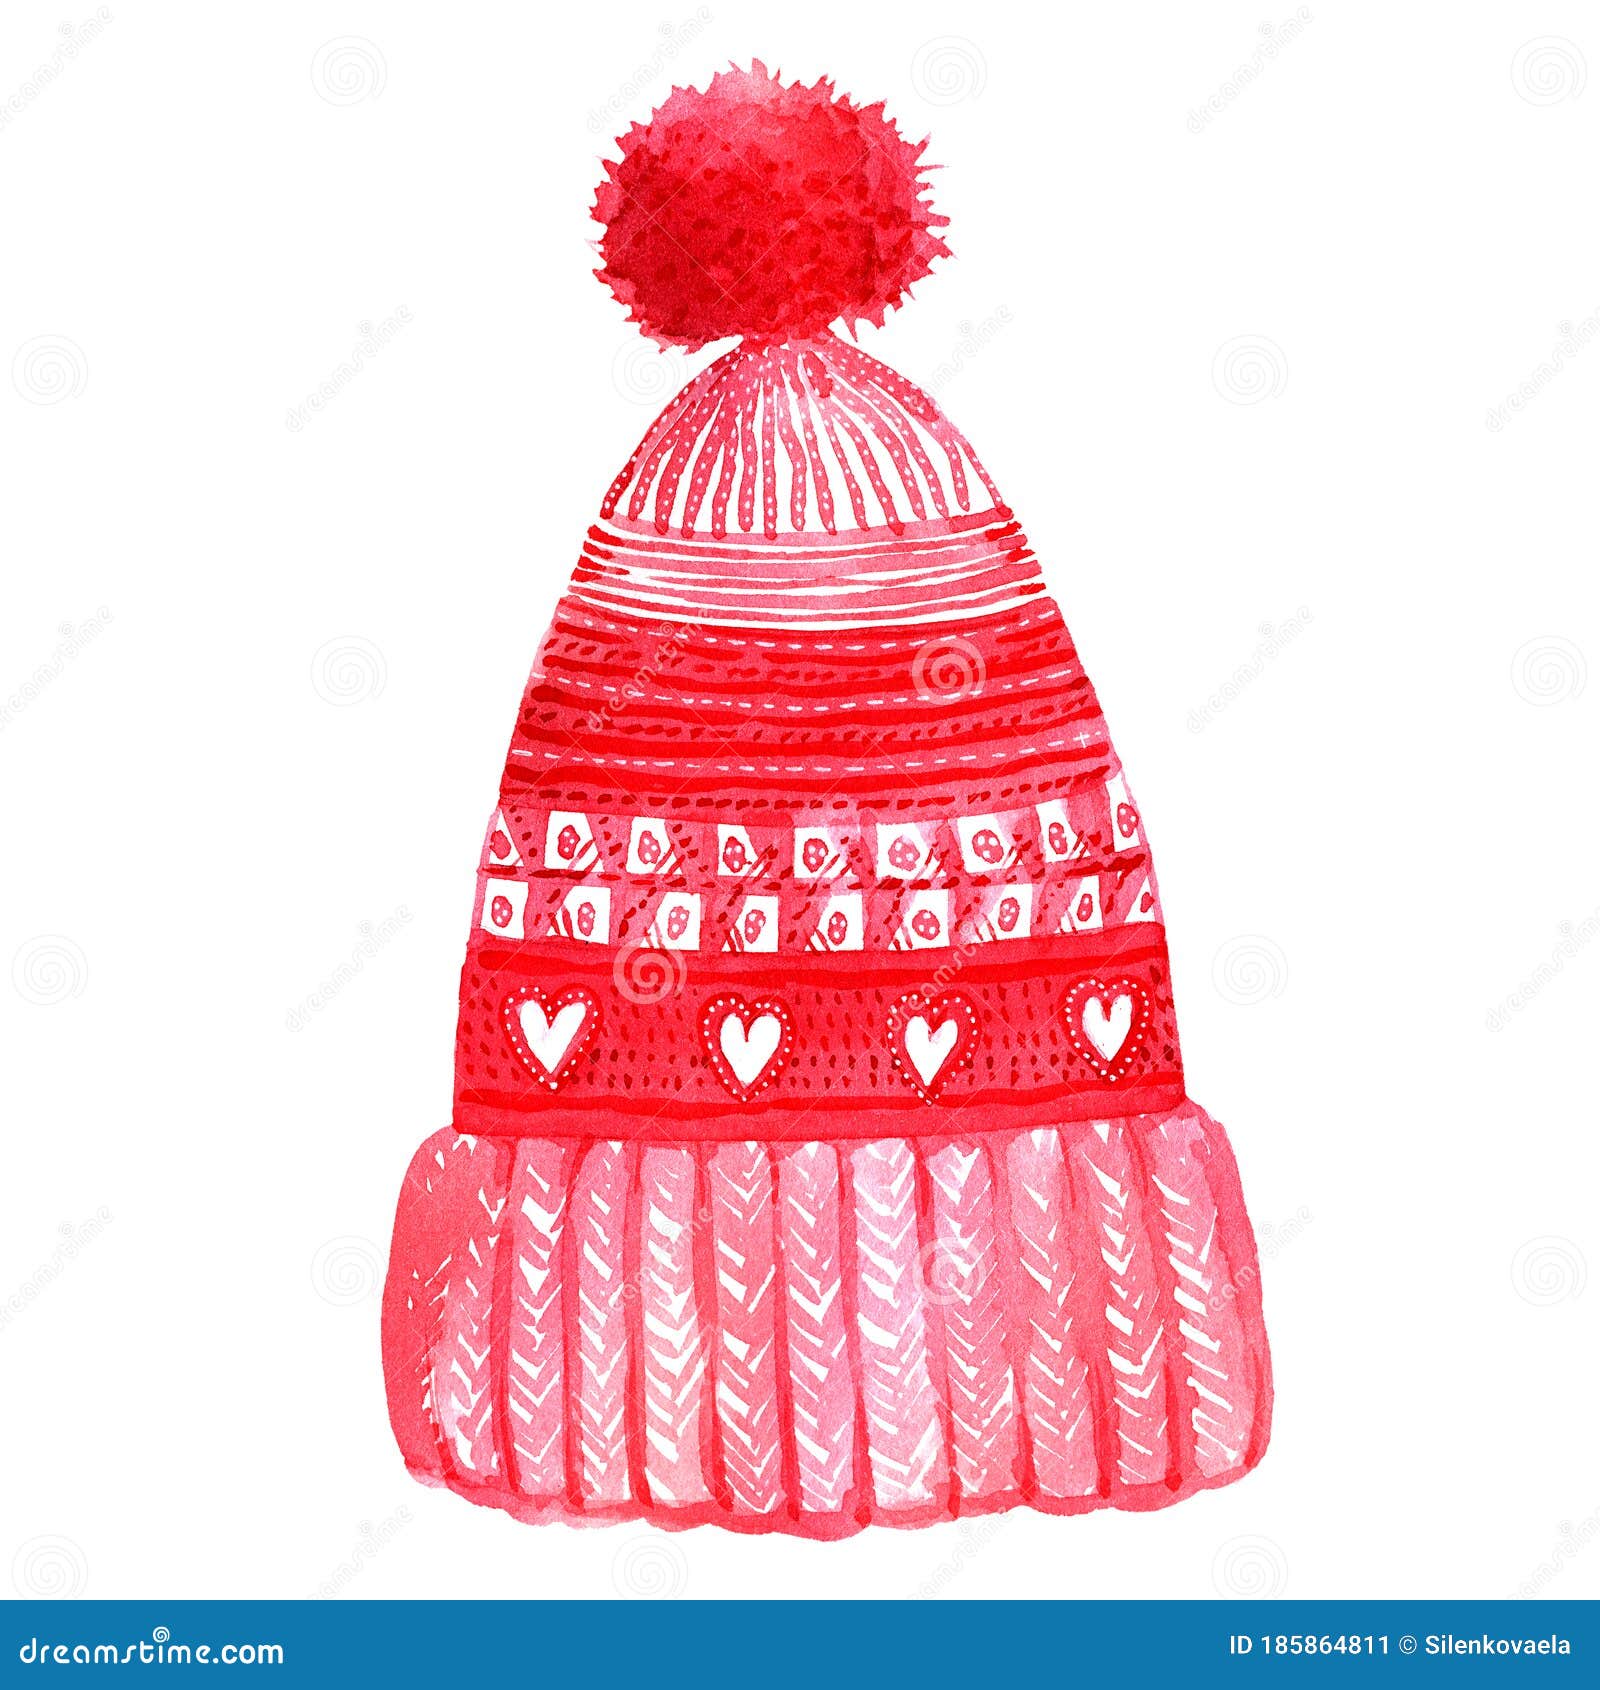 Watercolor Illustration Knitted Hats With Pom Poms Stock Image Image Of Decorative Drawing